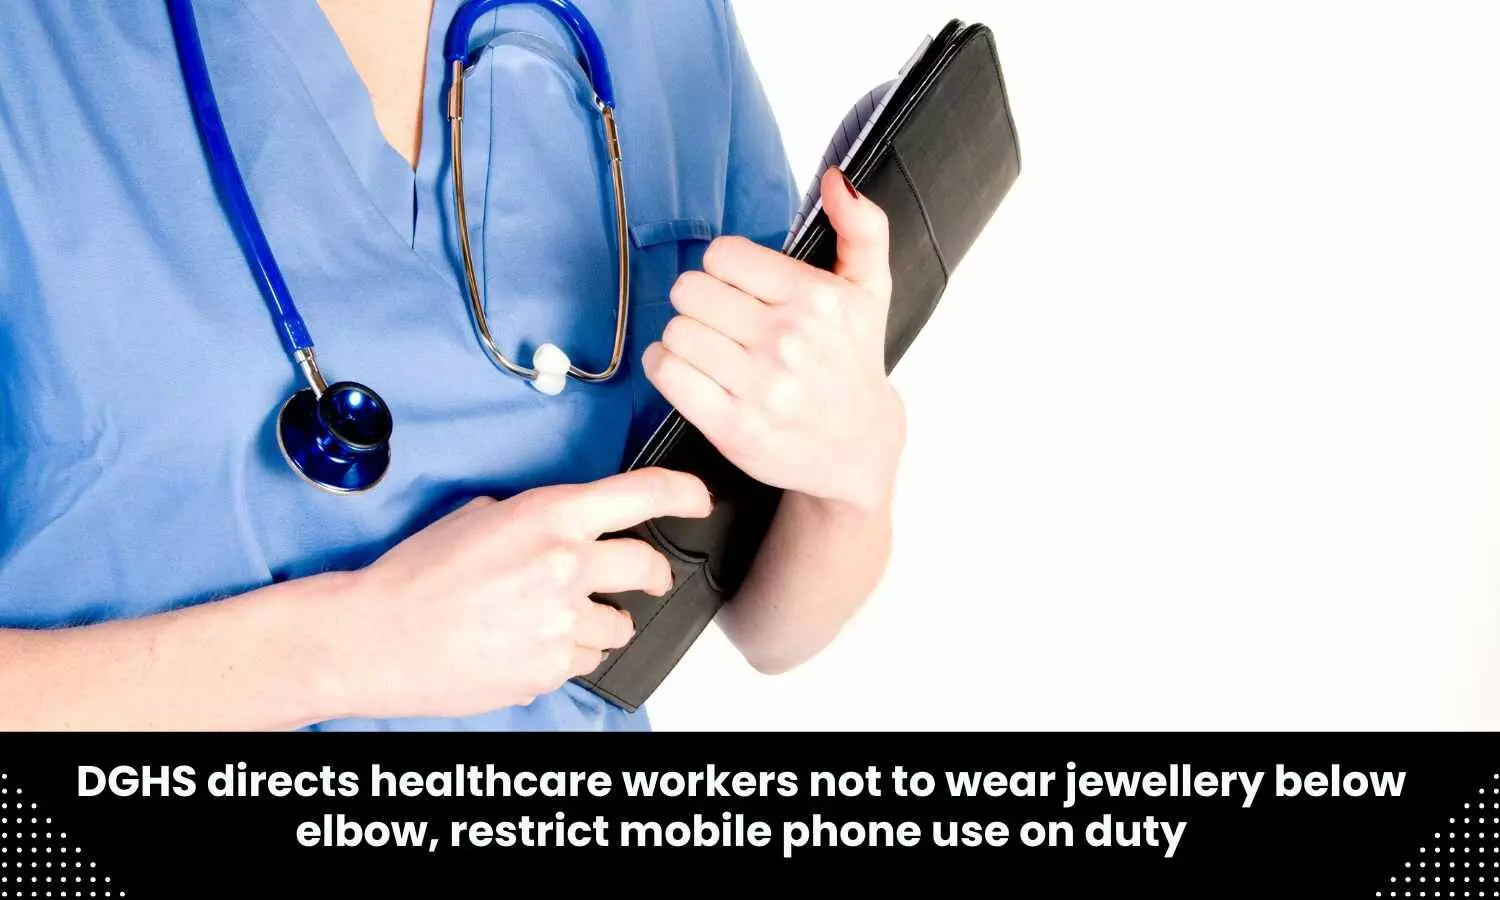 DGHS directs healthcare workers not to wear jewellery below elbow, restrict mobile phone use on duty